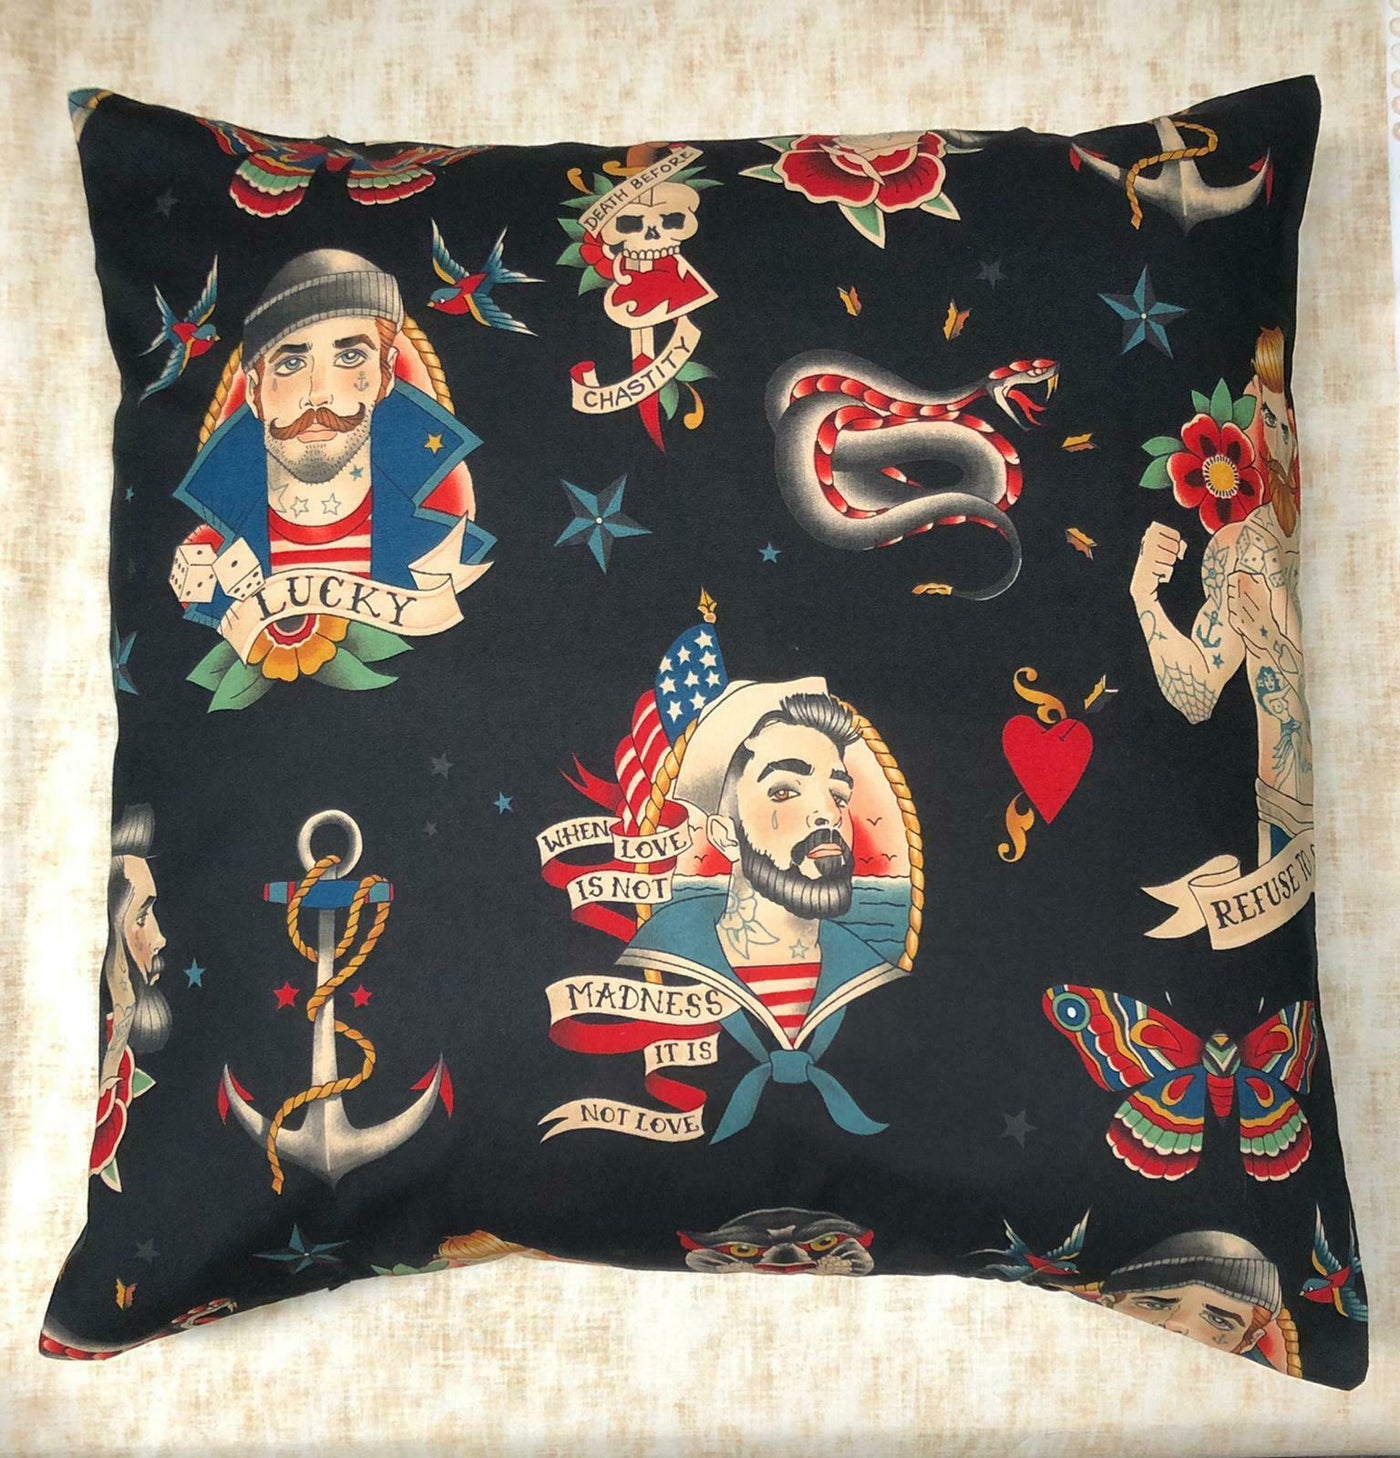 Anchors Away Cushion Cover - Black - Alexander Henry - 100% Cotton Fabric